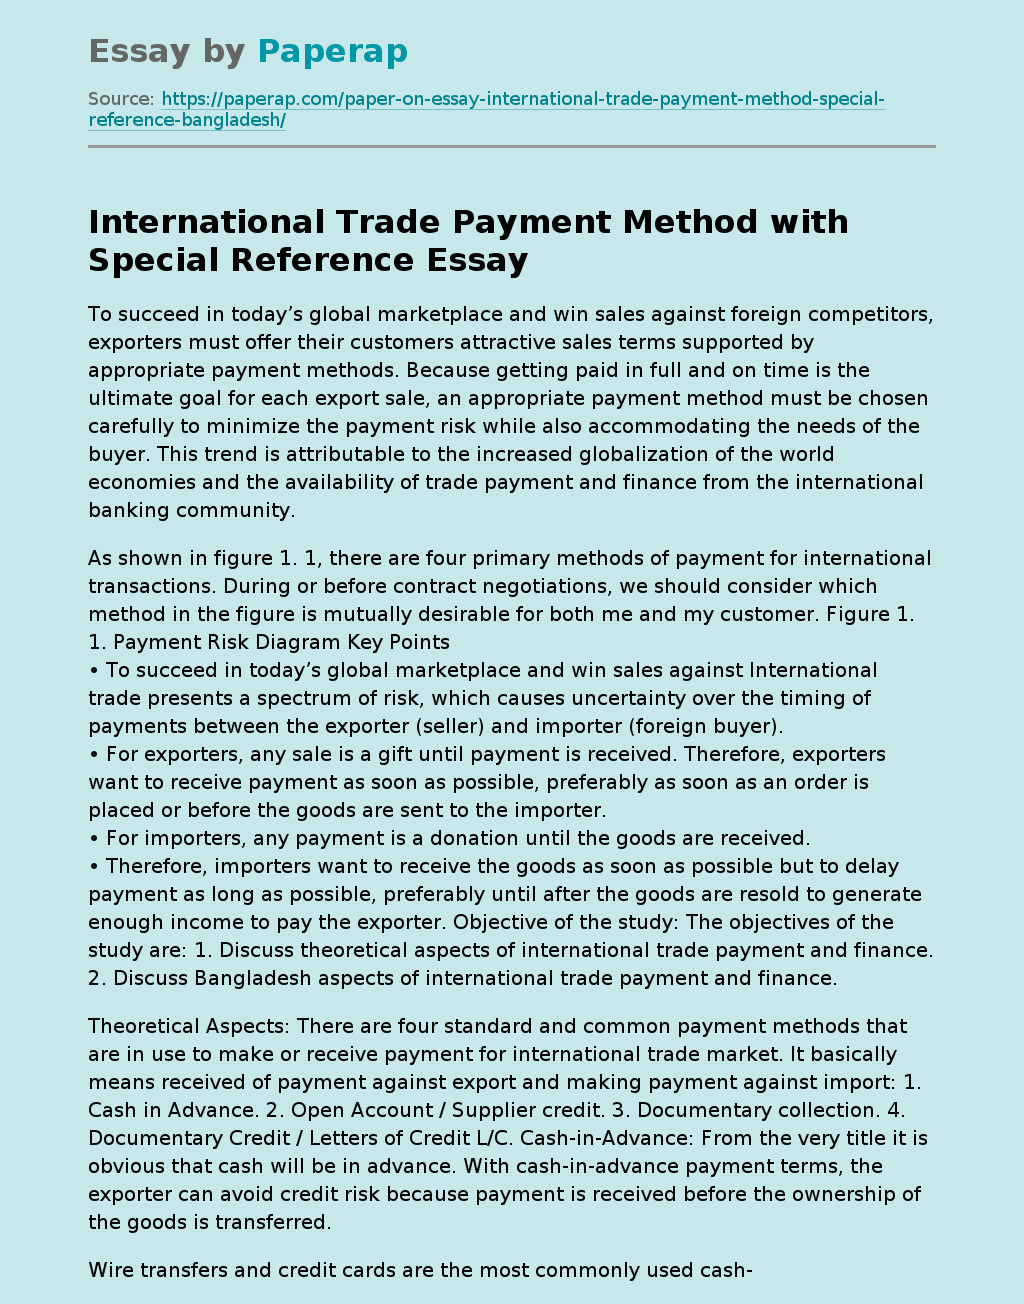 International Trade Payment Method with Special Reference